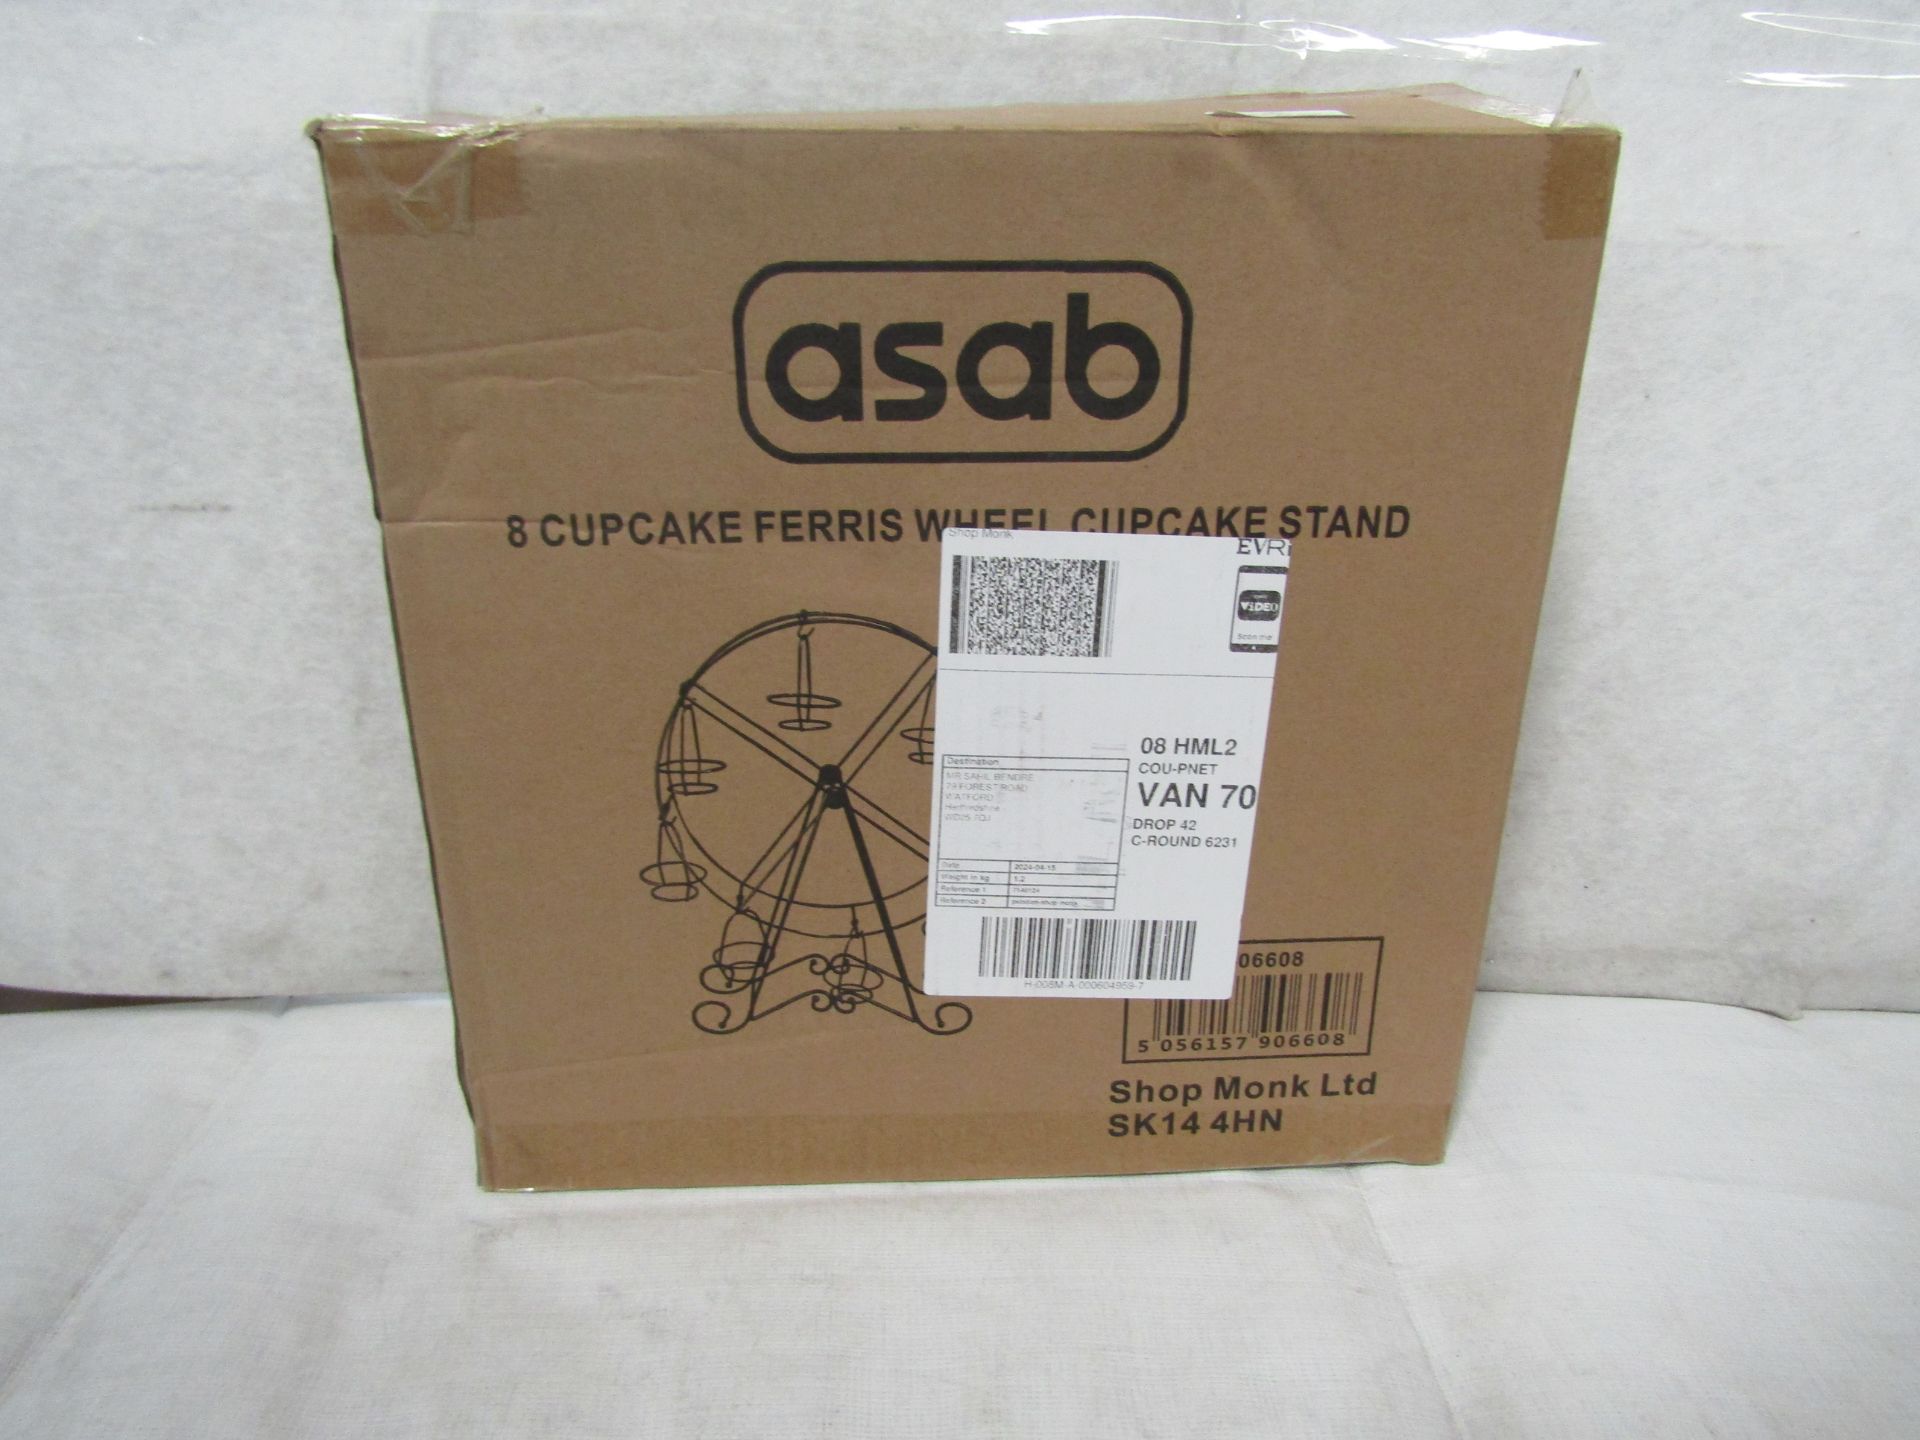 Asab - 8-Cupcake Ferris Wheel Cupcake Stand - Unchecked & Boxed.